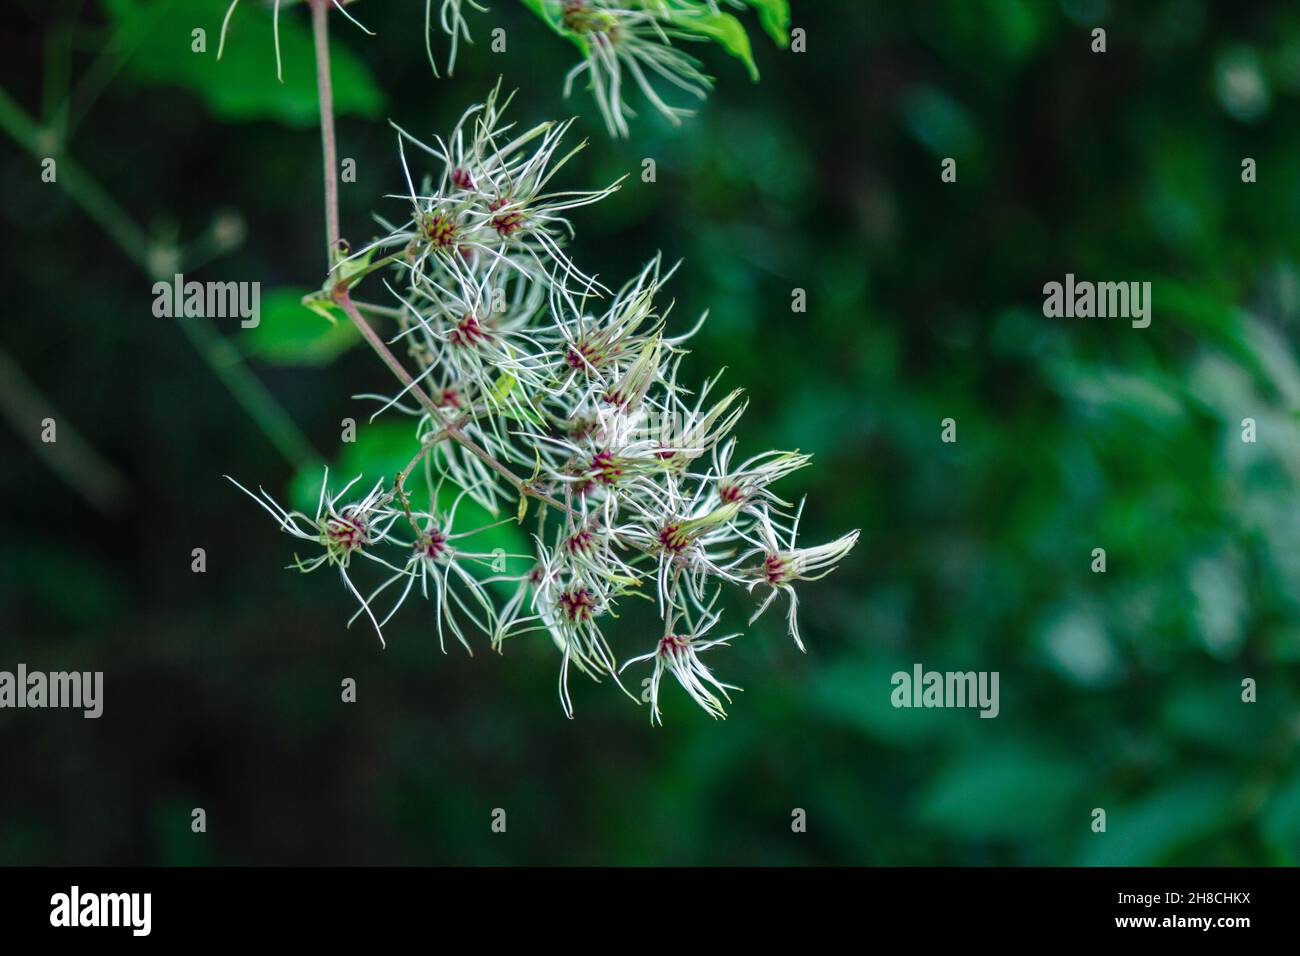 Unripe soft seed heads of clematis vitalba (Travelers Joy plant) on a branch Stock Photo